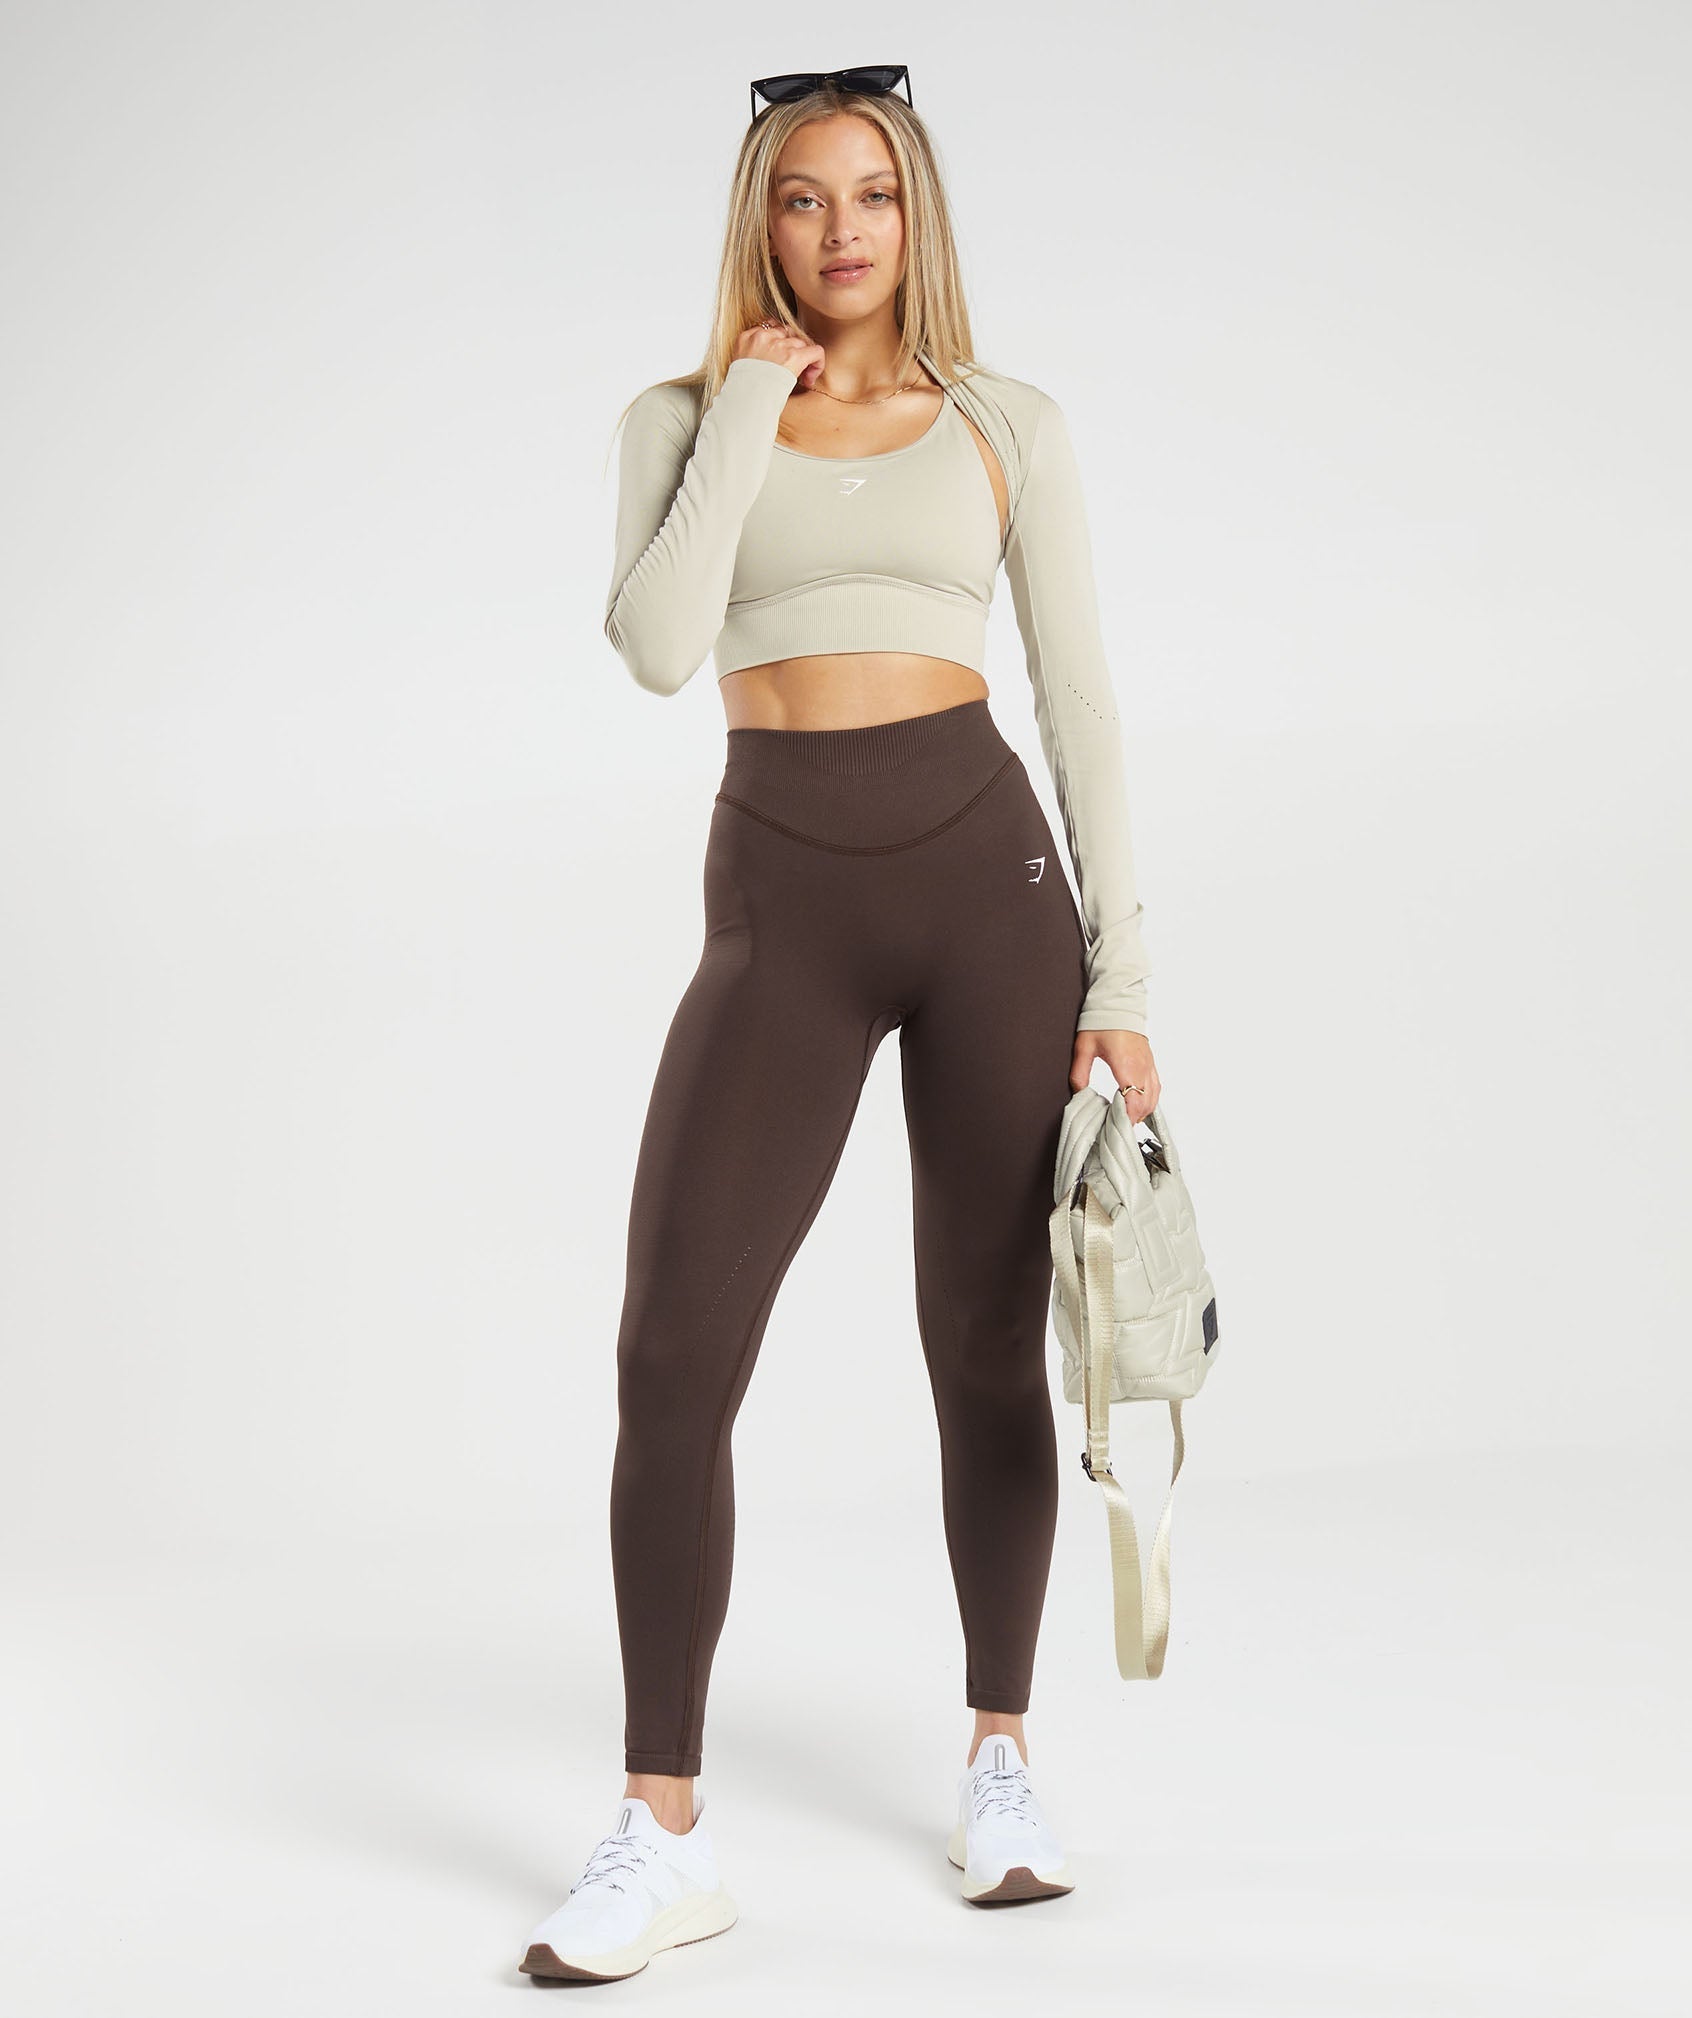 Sweat Seamless Long Sleeve Crop Top in Washed Stone Brown - view 4